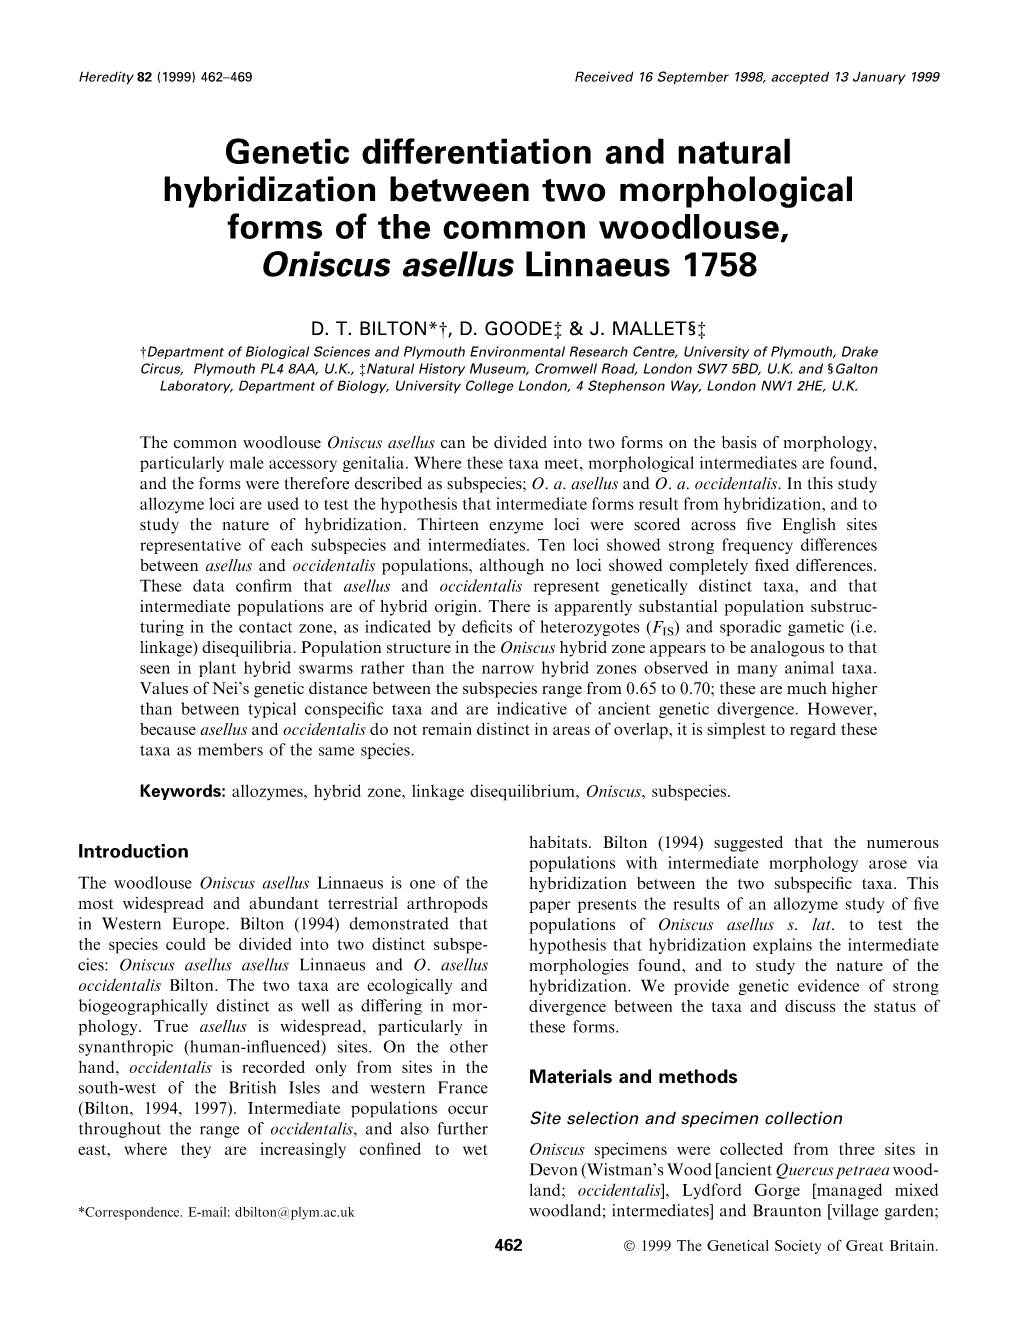 Genetic Differentiation and Natural Hybridization Between Two Morphological Forms of the Common Woodlouse, Oniscus Asellus Linnaeus 1758